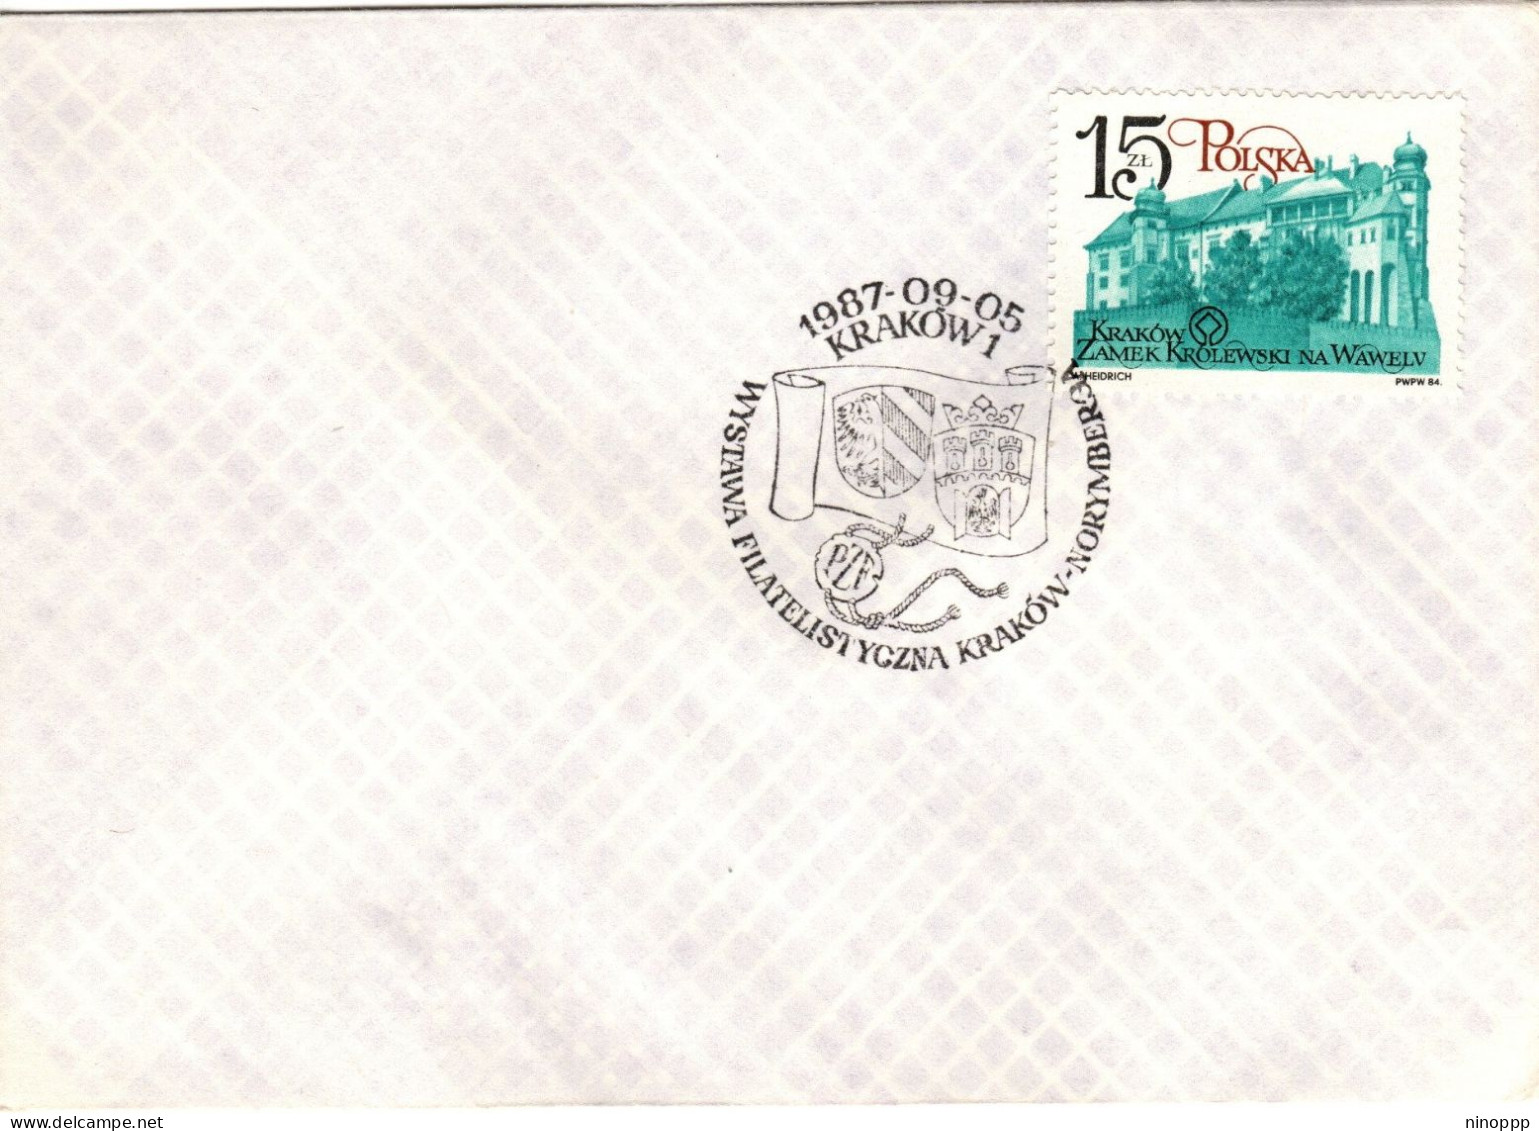 Poland 1987 Krakow Restoration  First Day Cover - FDC